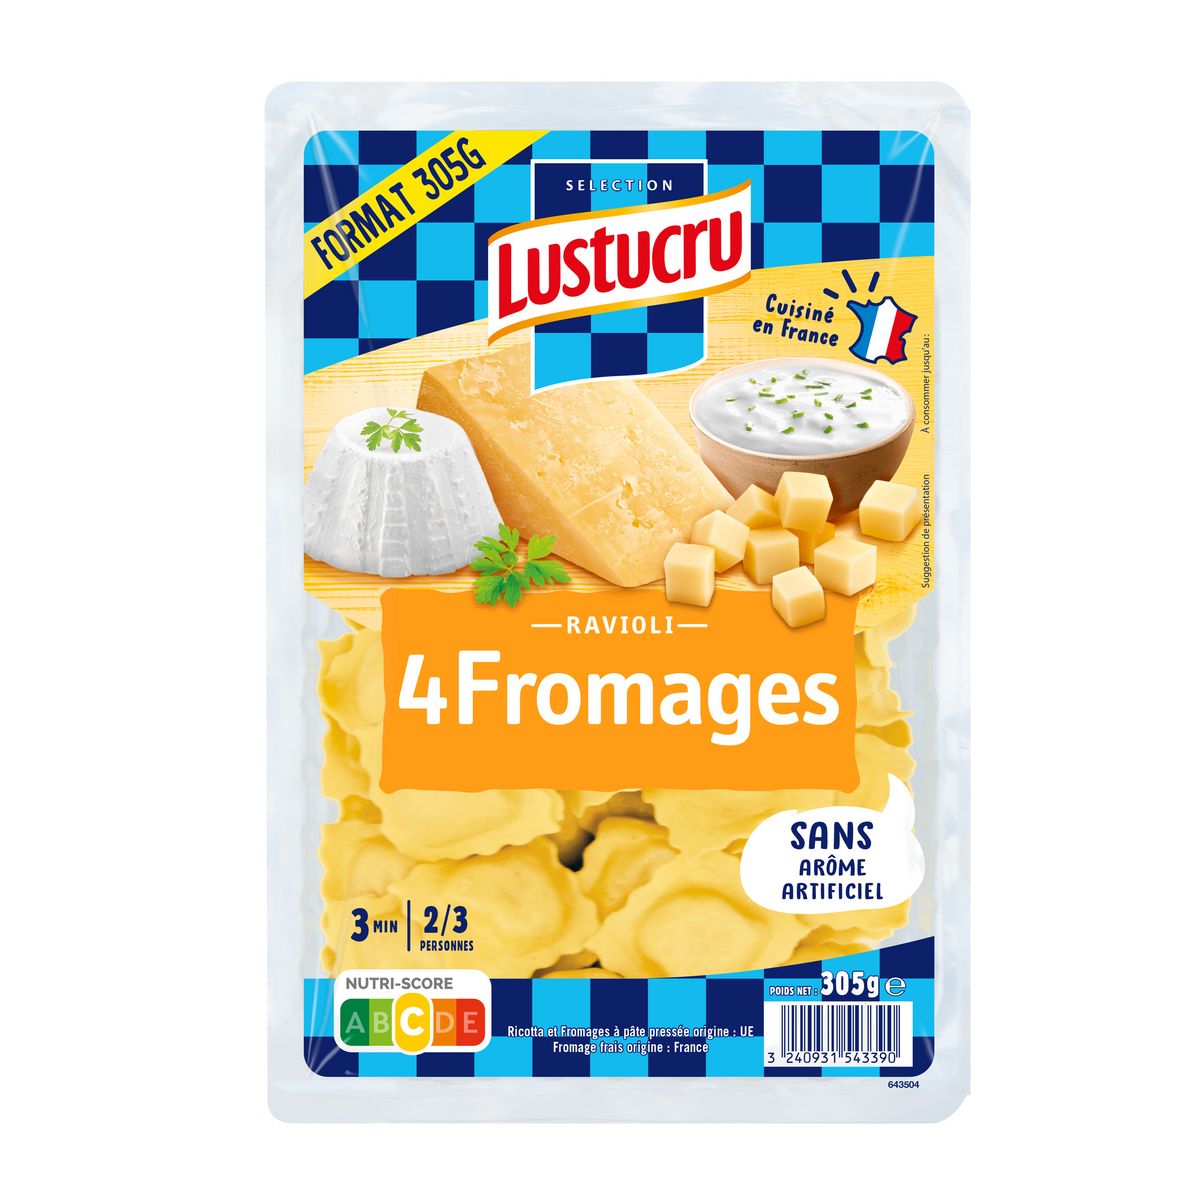 LUSTUCRU Ravioli 4 fromages 3 portions 305g